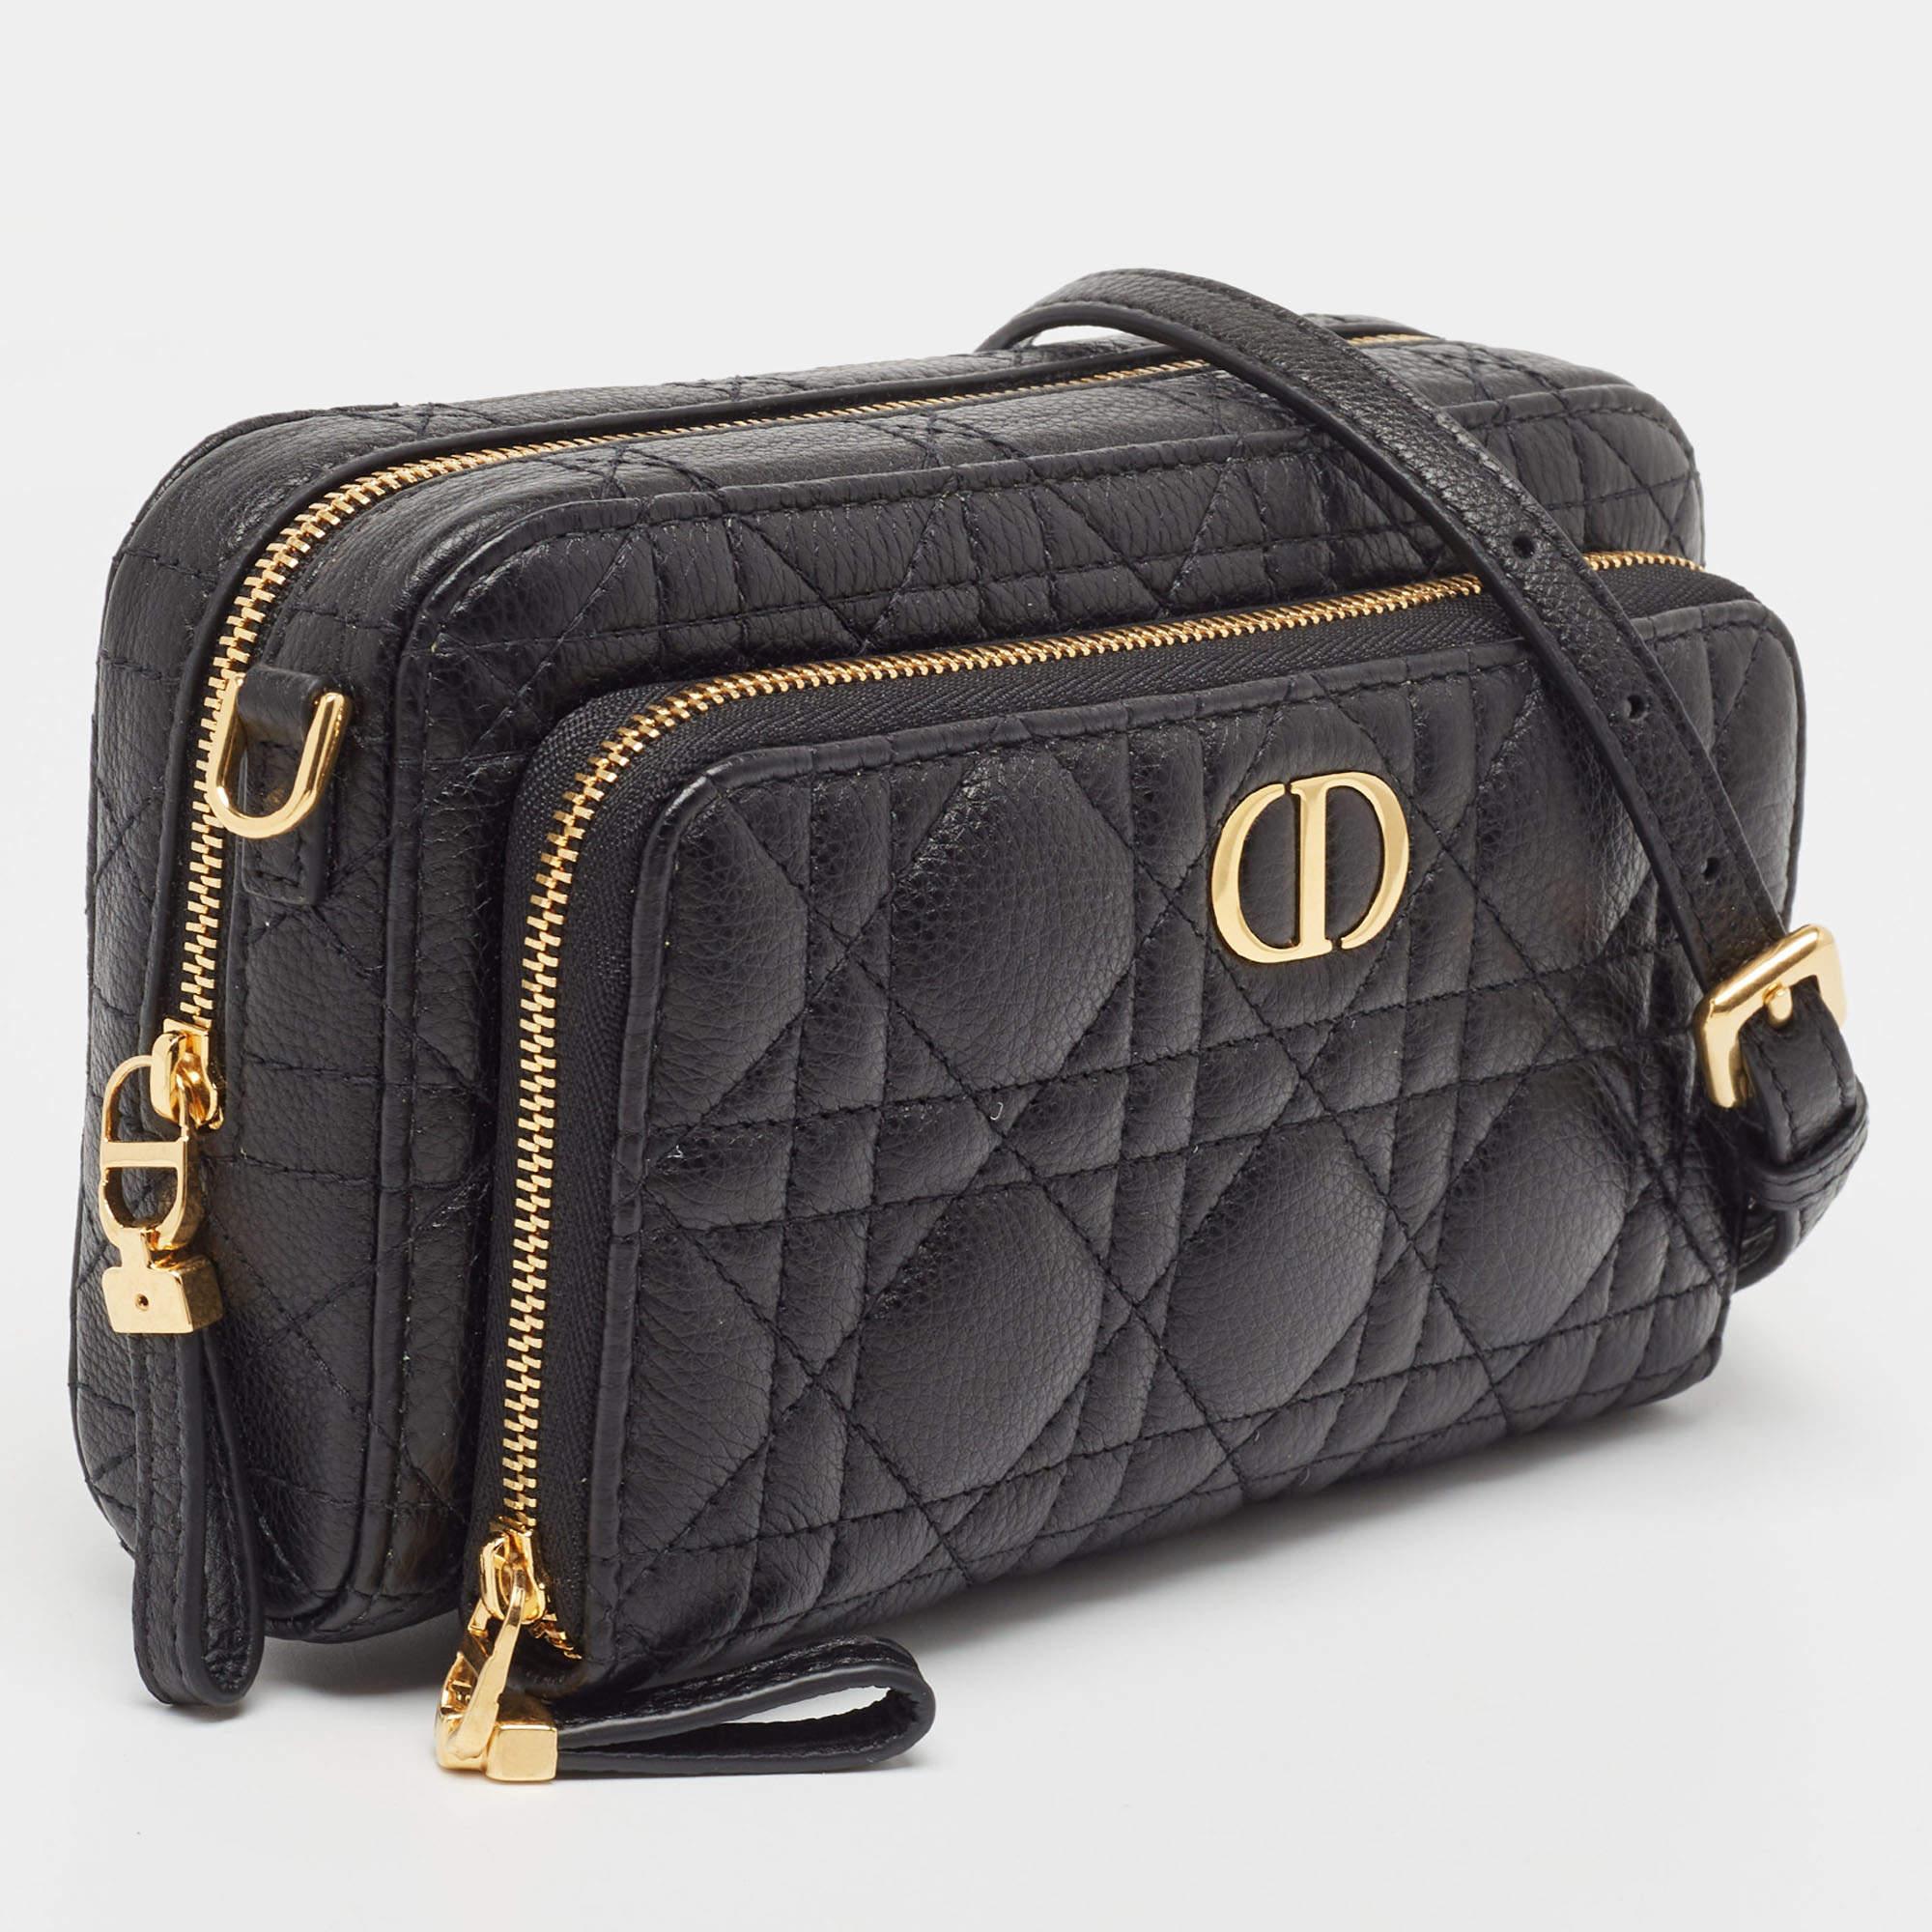 Perfect for conveniently housing your essentials in one place, this Dior double pouch bag is a worthy investment. It has notable details and offers a look of luxury.

